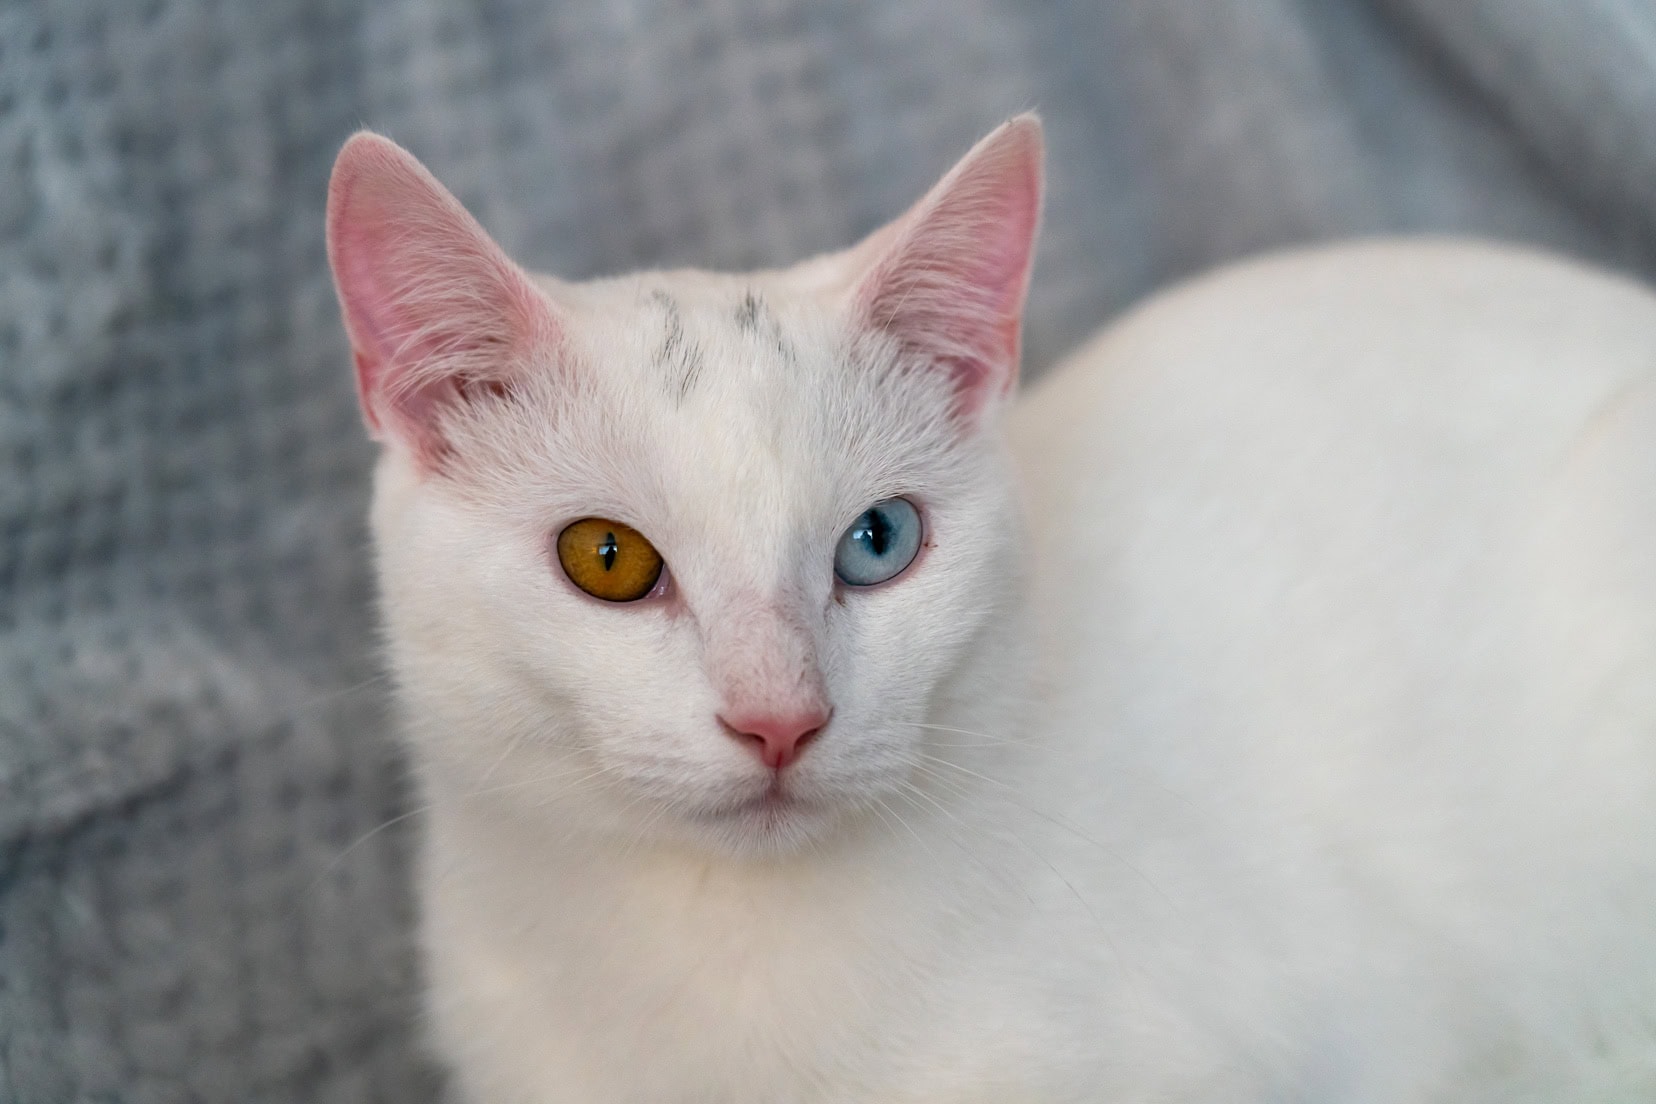 White cat with one blue and one orange eye 